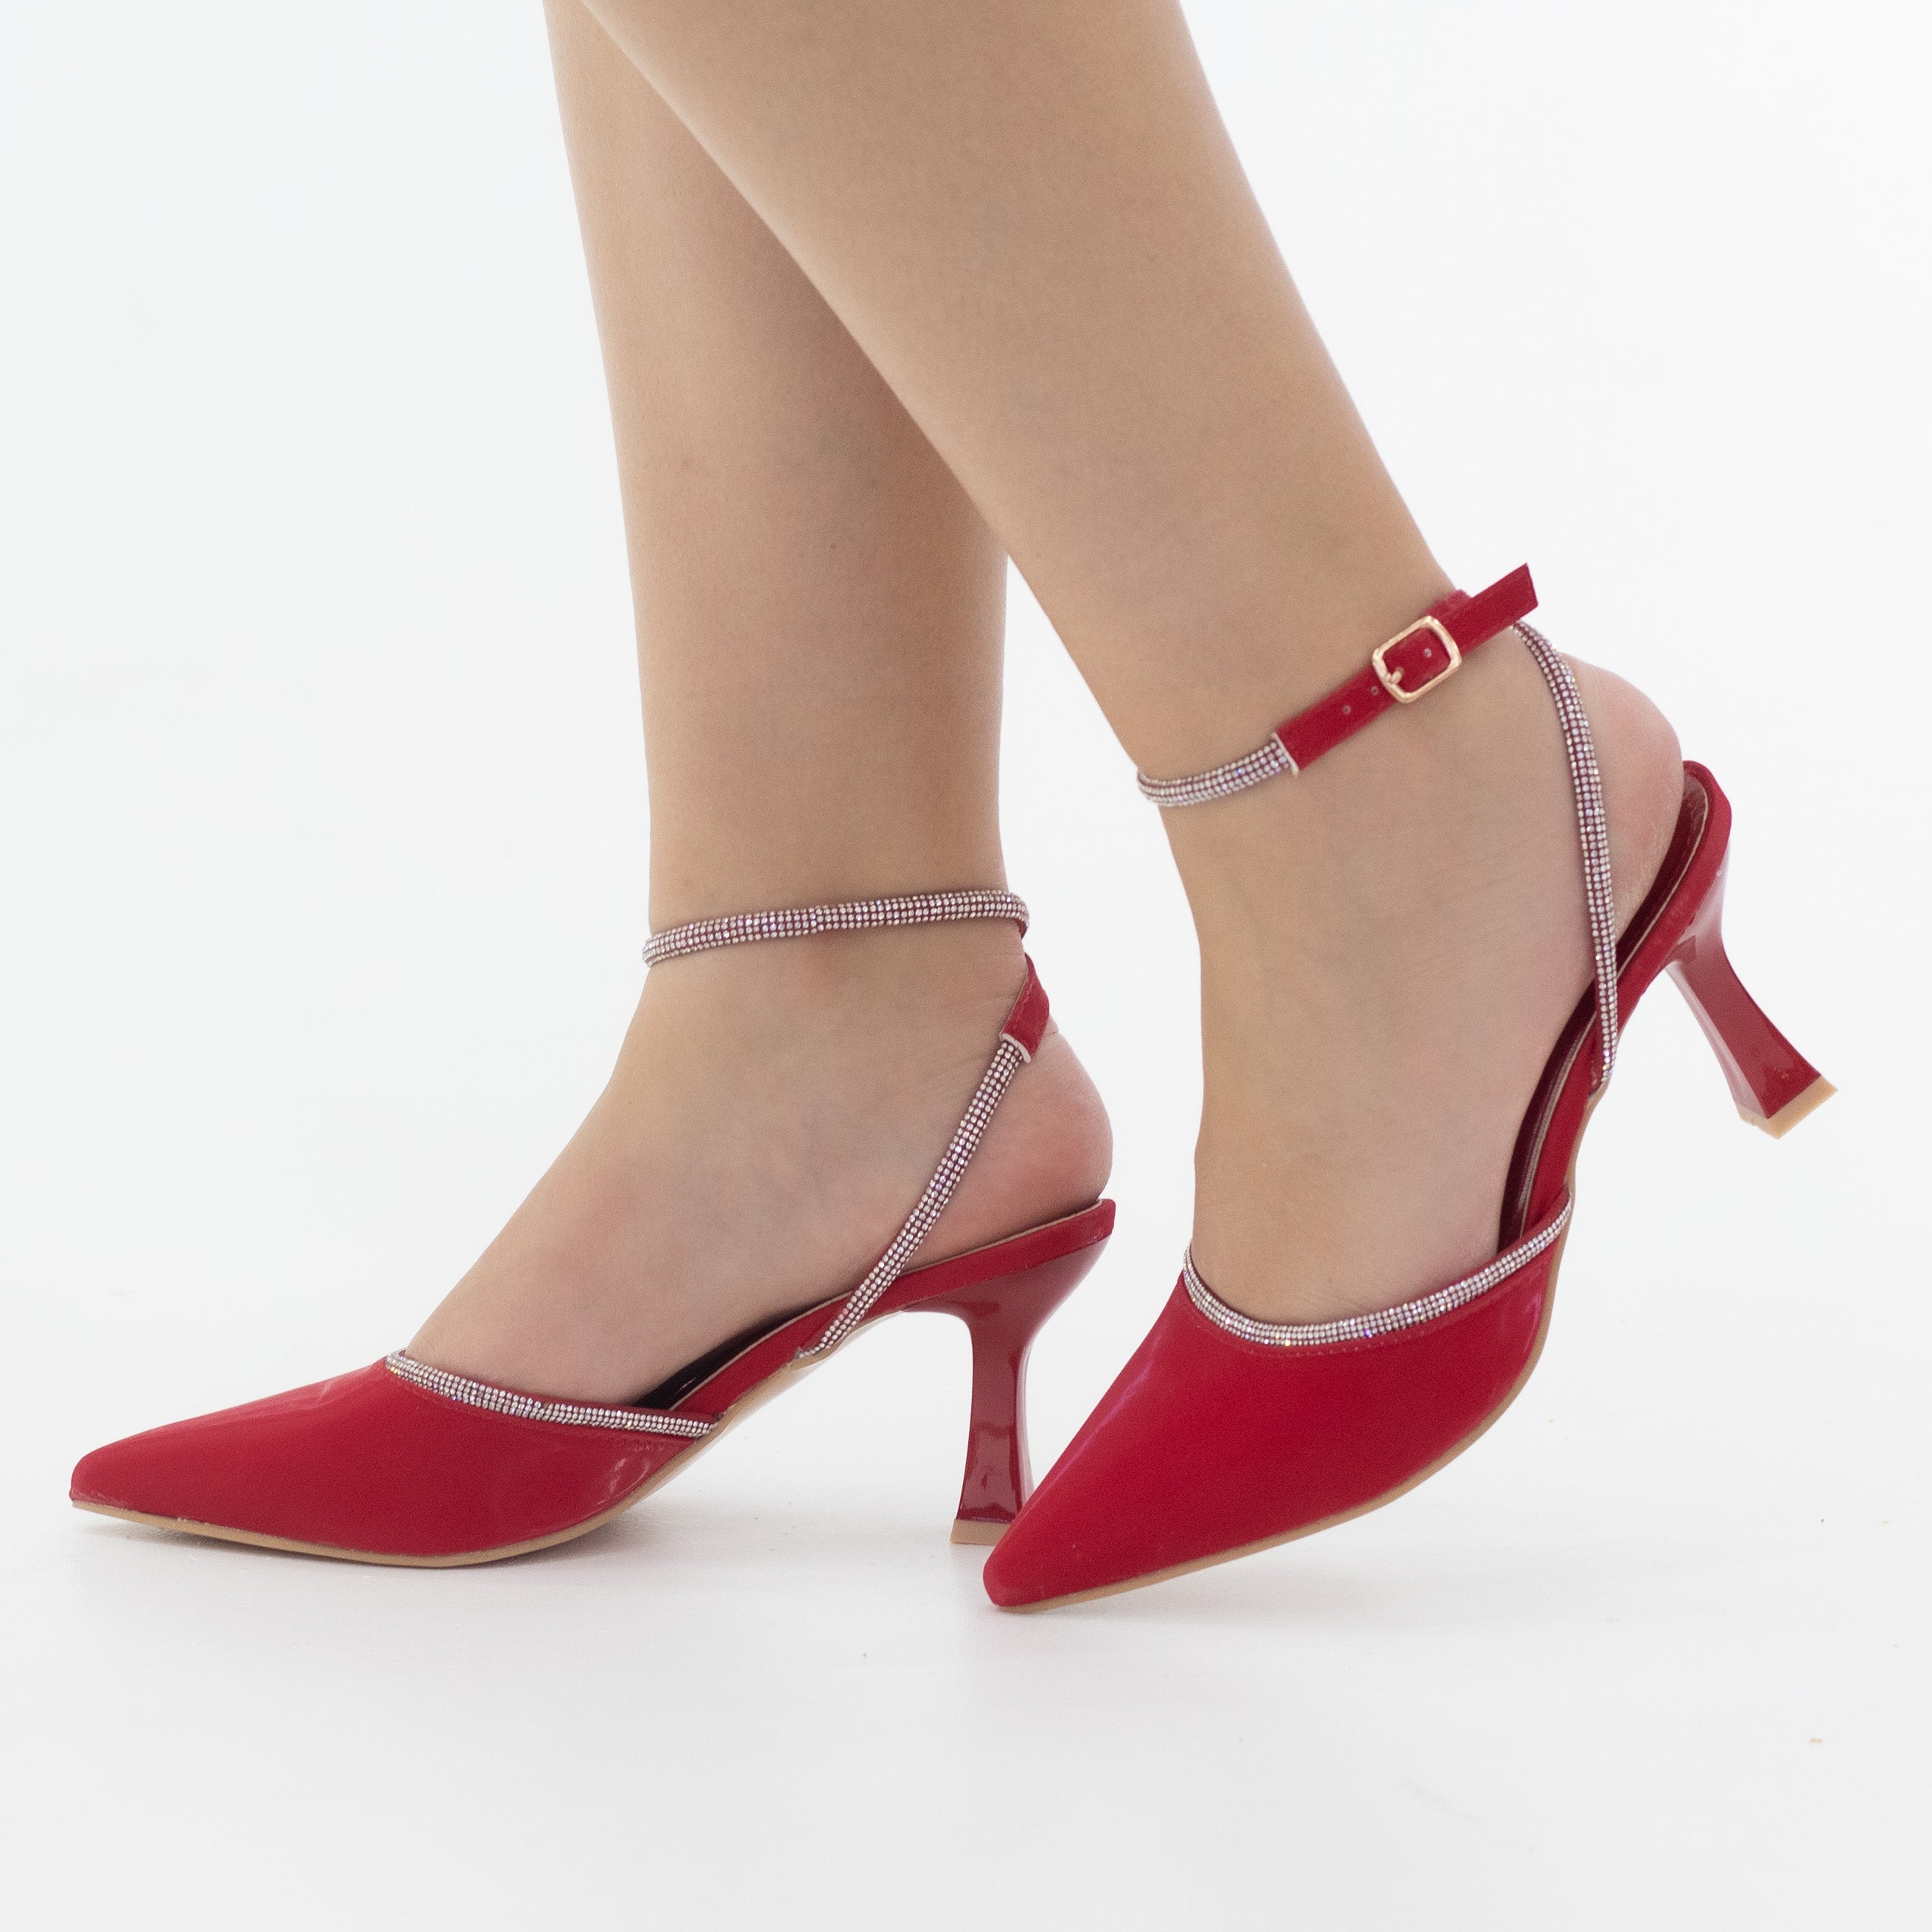 Red embellished with diamante detailed on spool heel hamisha